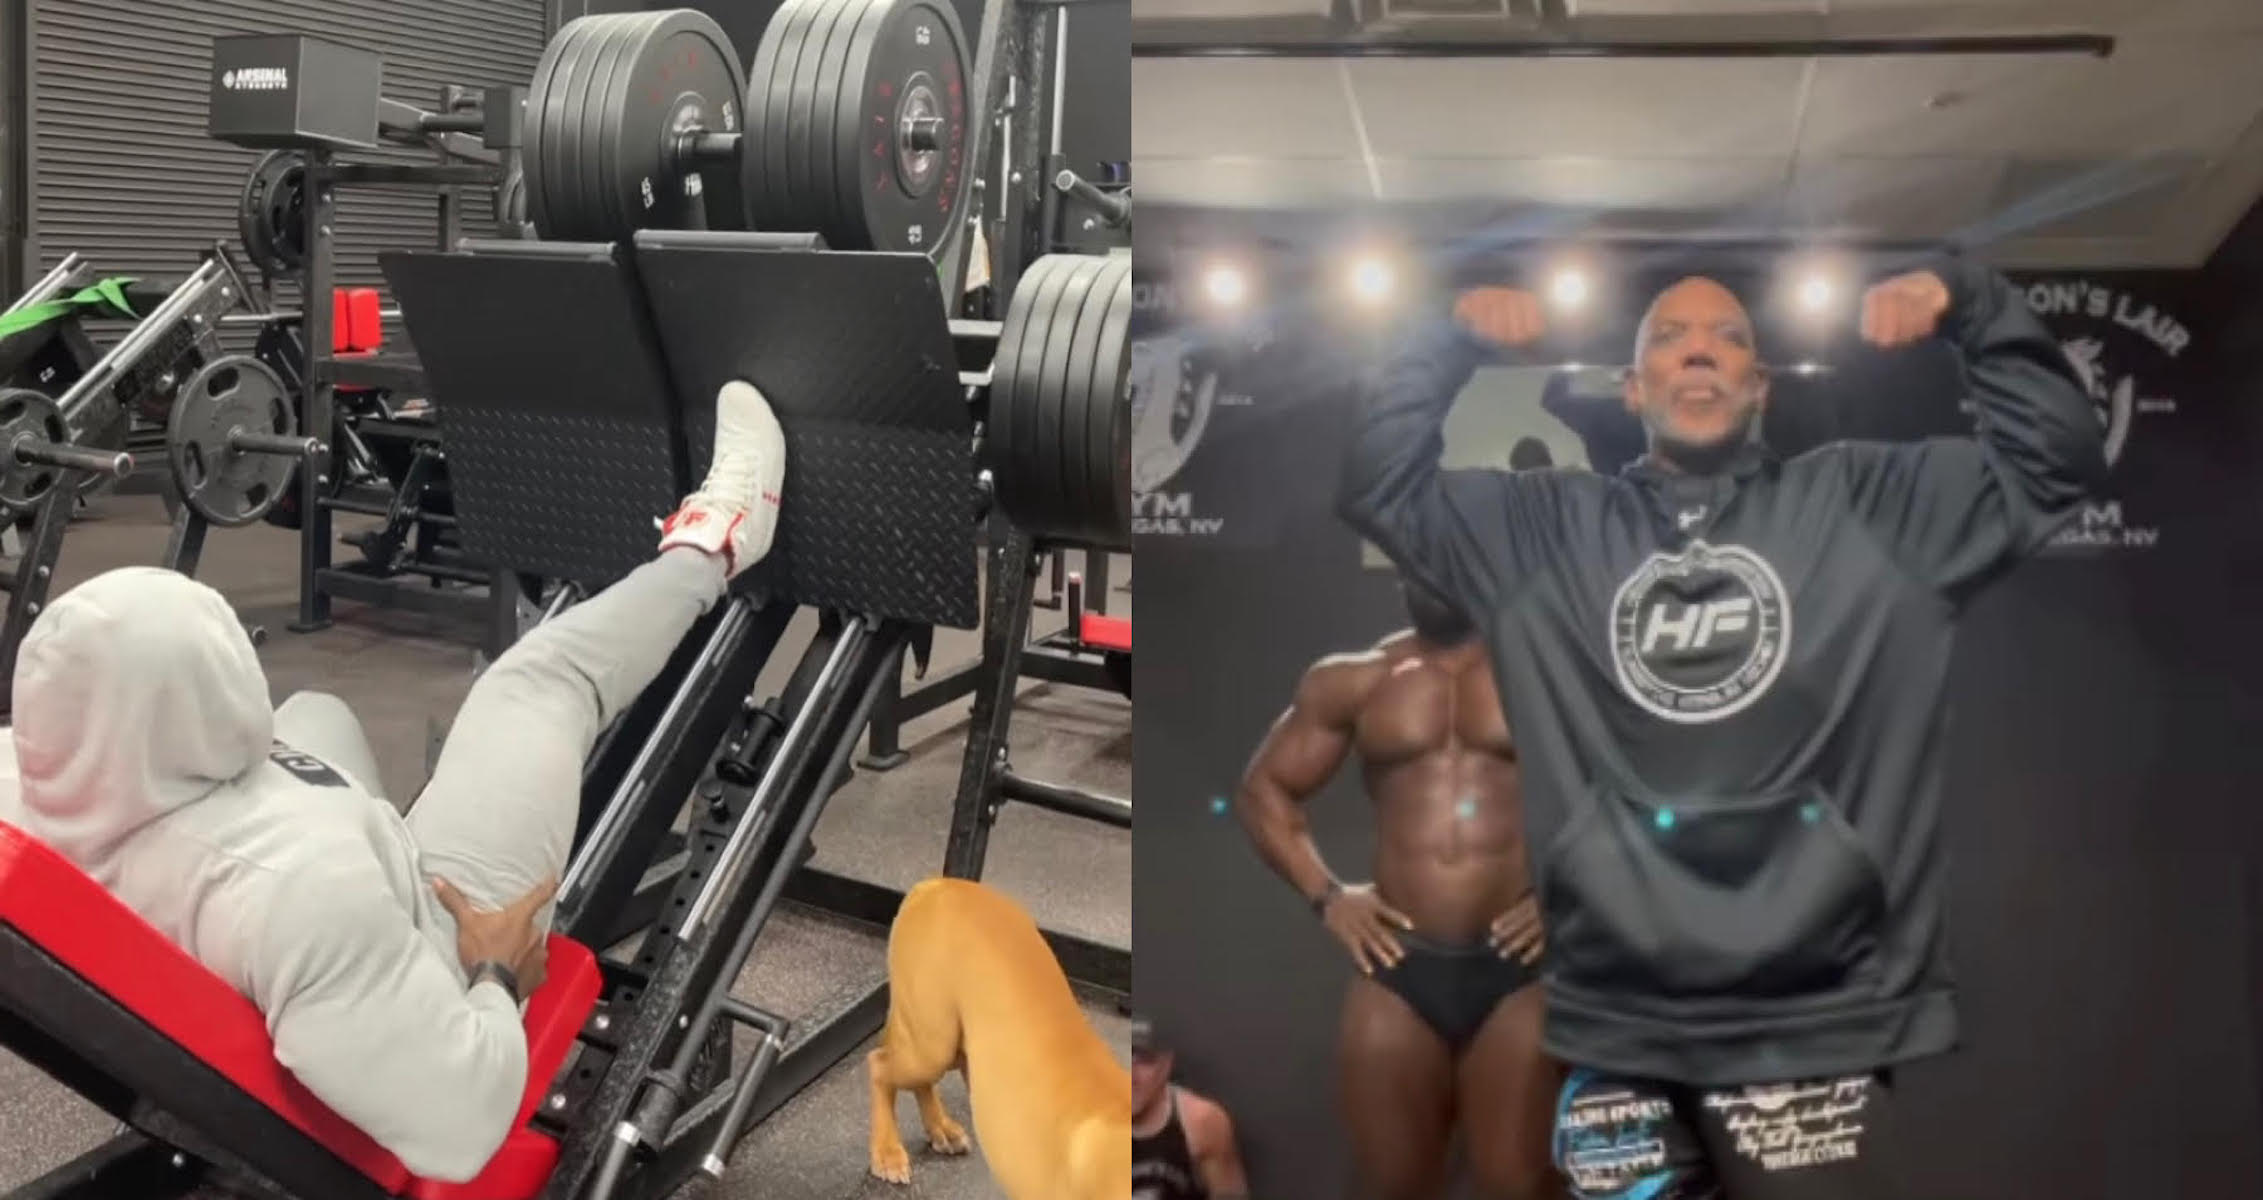 Andrew Jacked Trains Legs, Gets Posing Tips From Flex Wheeler